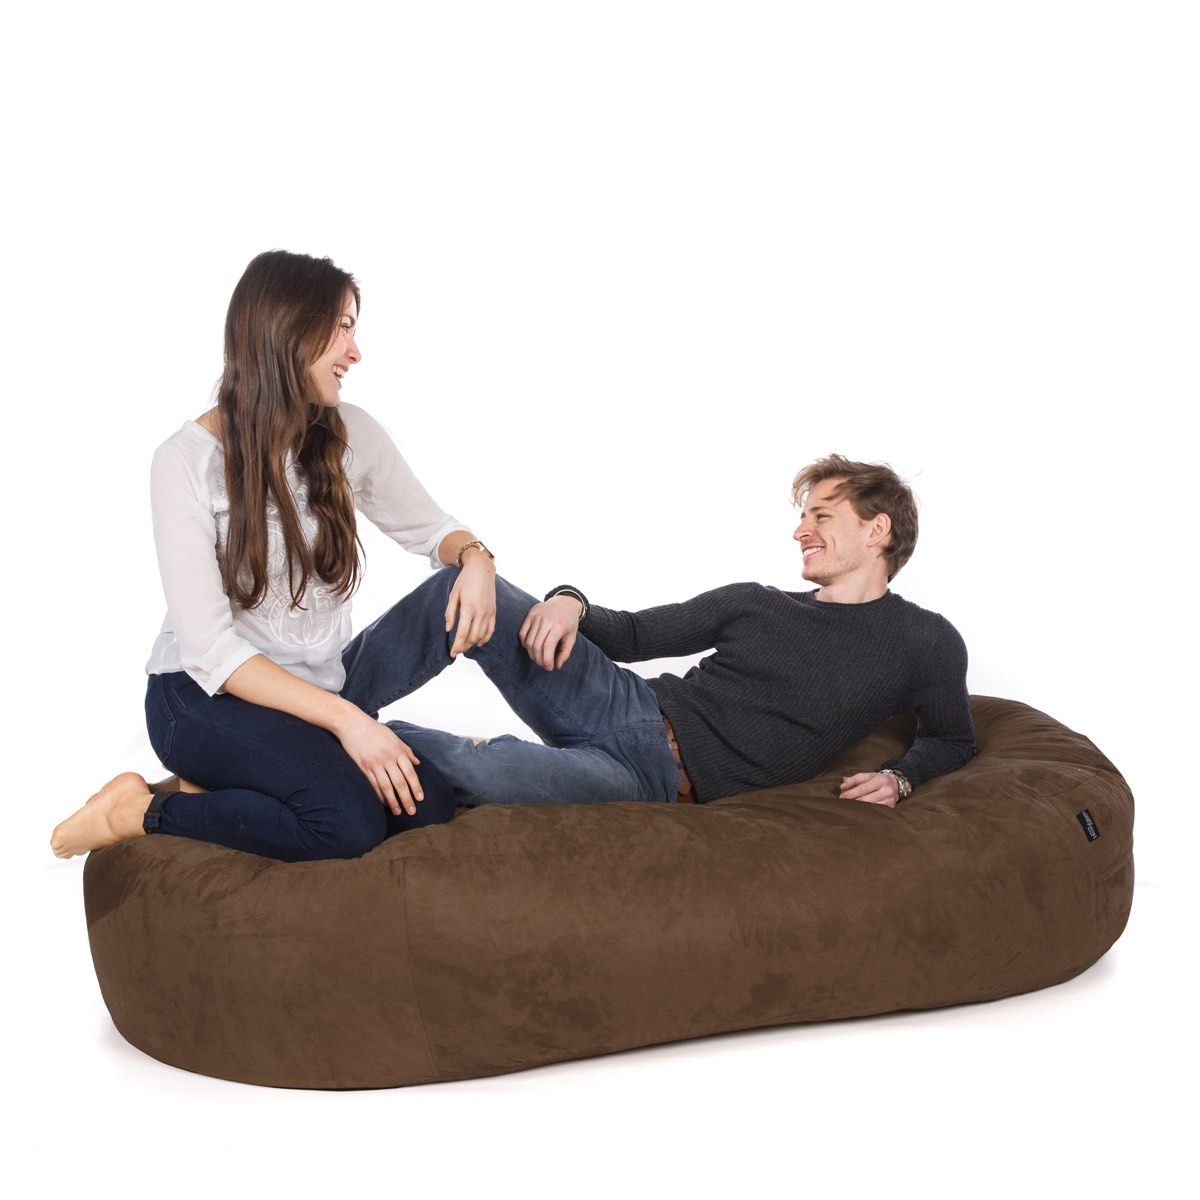 Giant Bean Bag Chair (No Filler), Foam-Filled Furniture Machine Washable  Covers, Bean Bag Sofa Chair Soft Fluffy Fur Portable Living Room Lazy Sofa  Bed Cover : Amazon.co.uk: Home & Kitchen